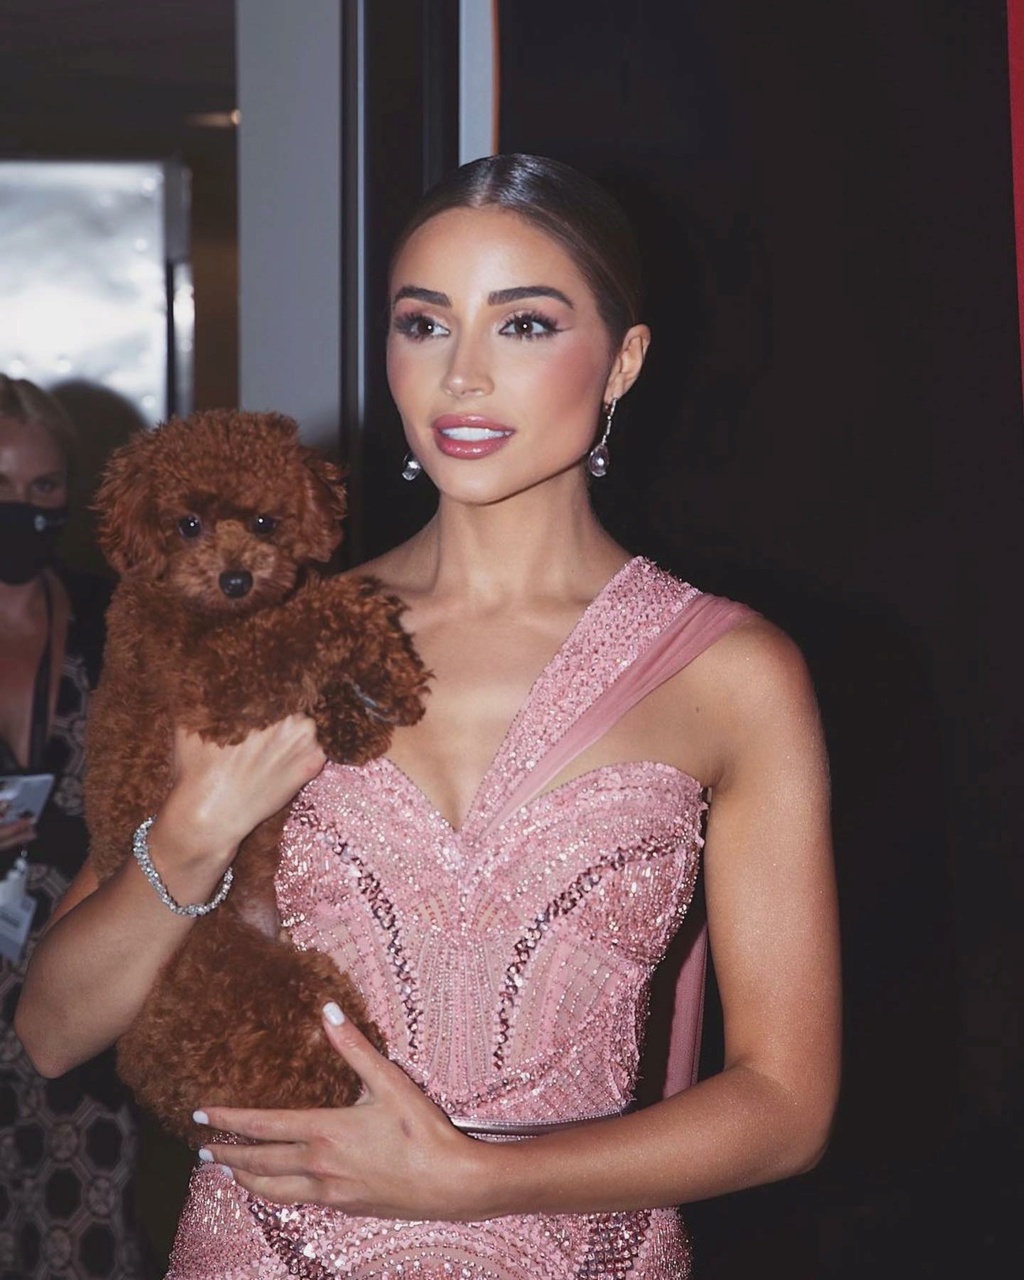 ♔ Official Thread of MISS UNIVERSE® 2012- Olivia Culpo - USA ♔ - Page 9 18447511